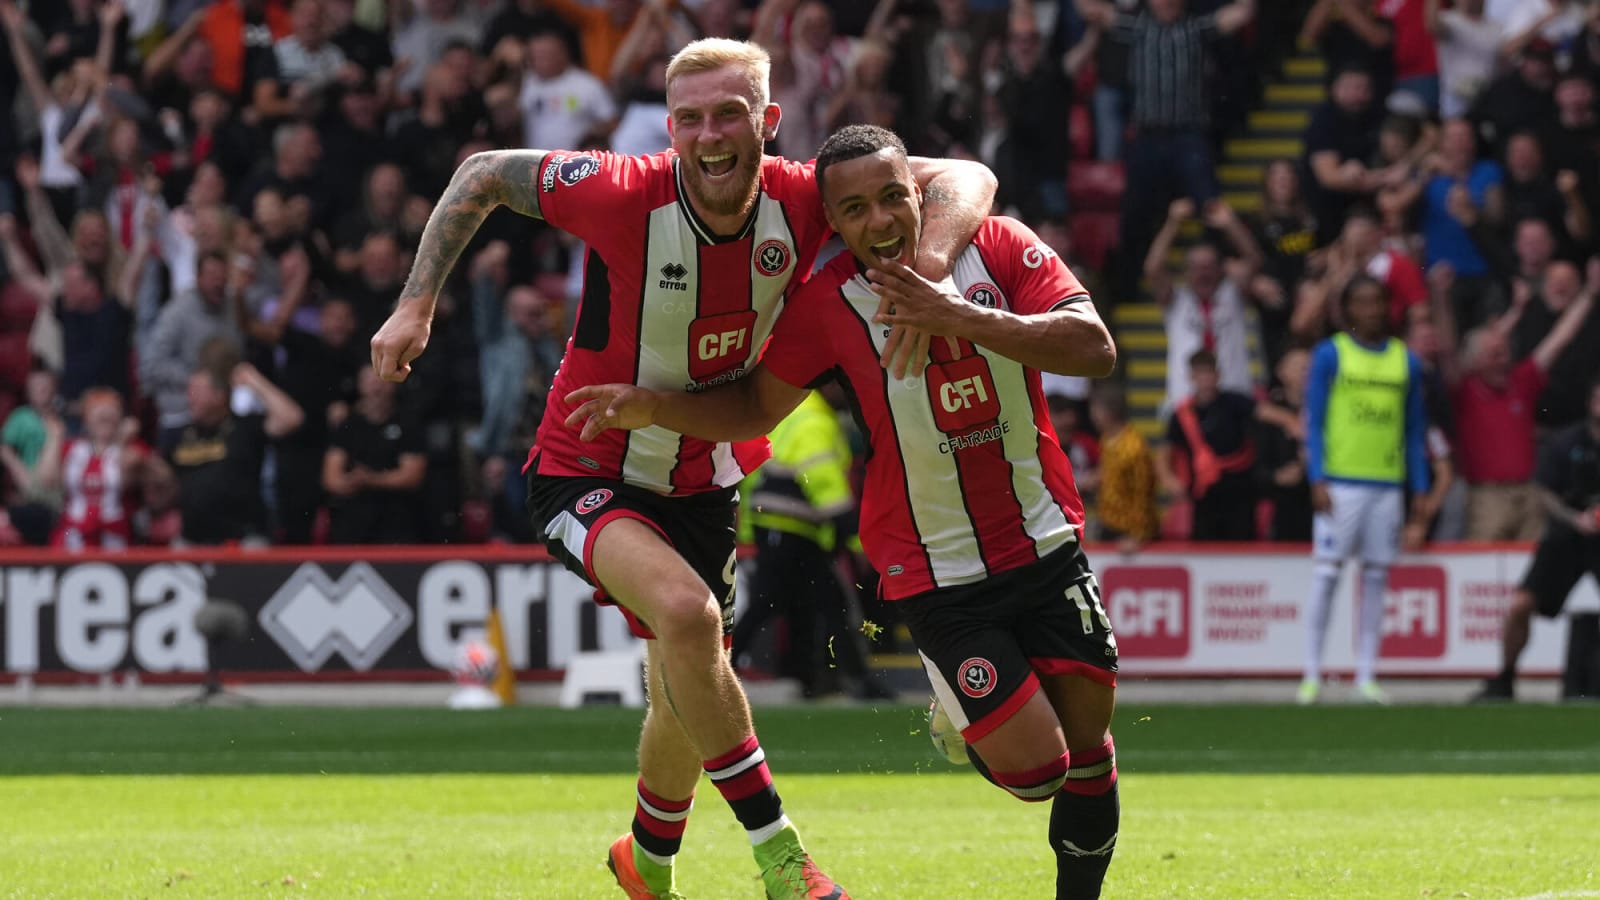 Sheffield United 1 – 1 Everton: Cameron Archer finishes off beautiful move (video)